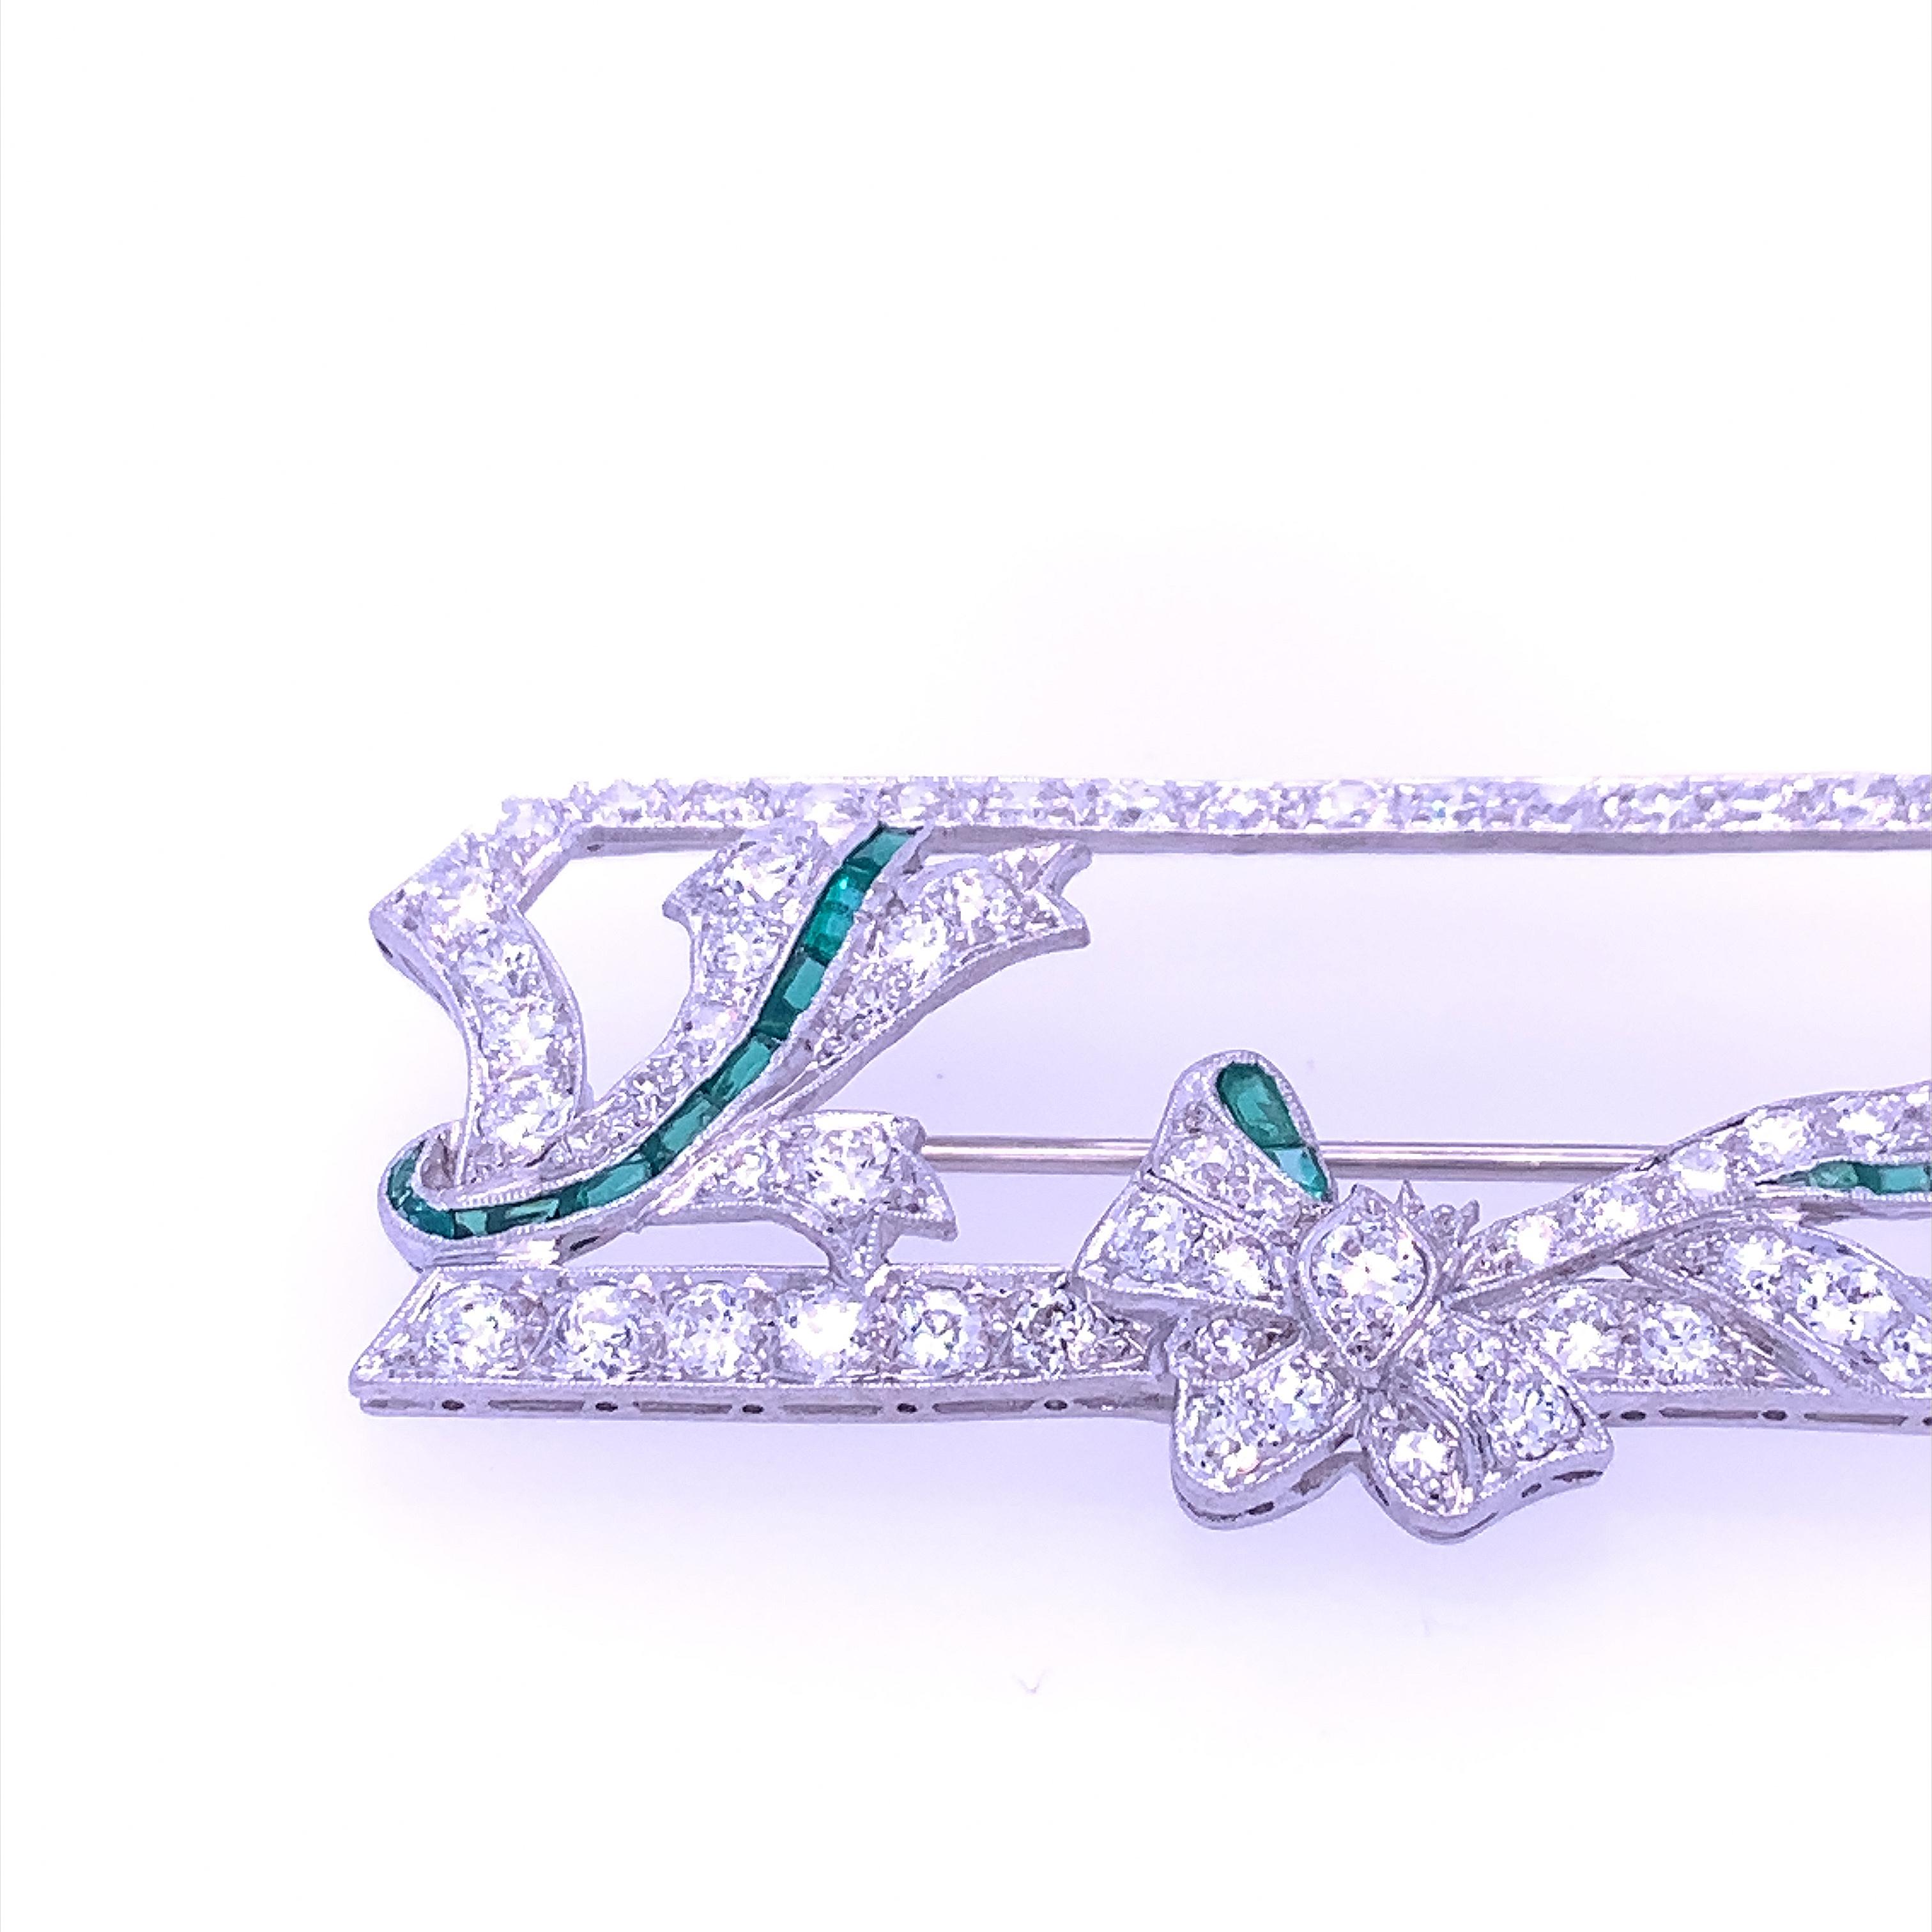 This exquisite Art Deco brooch features a diamond encrusted frame adorned with a diamond and emerald bow. A matching diamond and emerald accent anchor on the opposite side of the frame. Featuring high quality diamonds, it is enhanced by hand cut